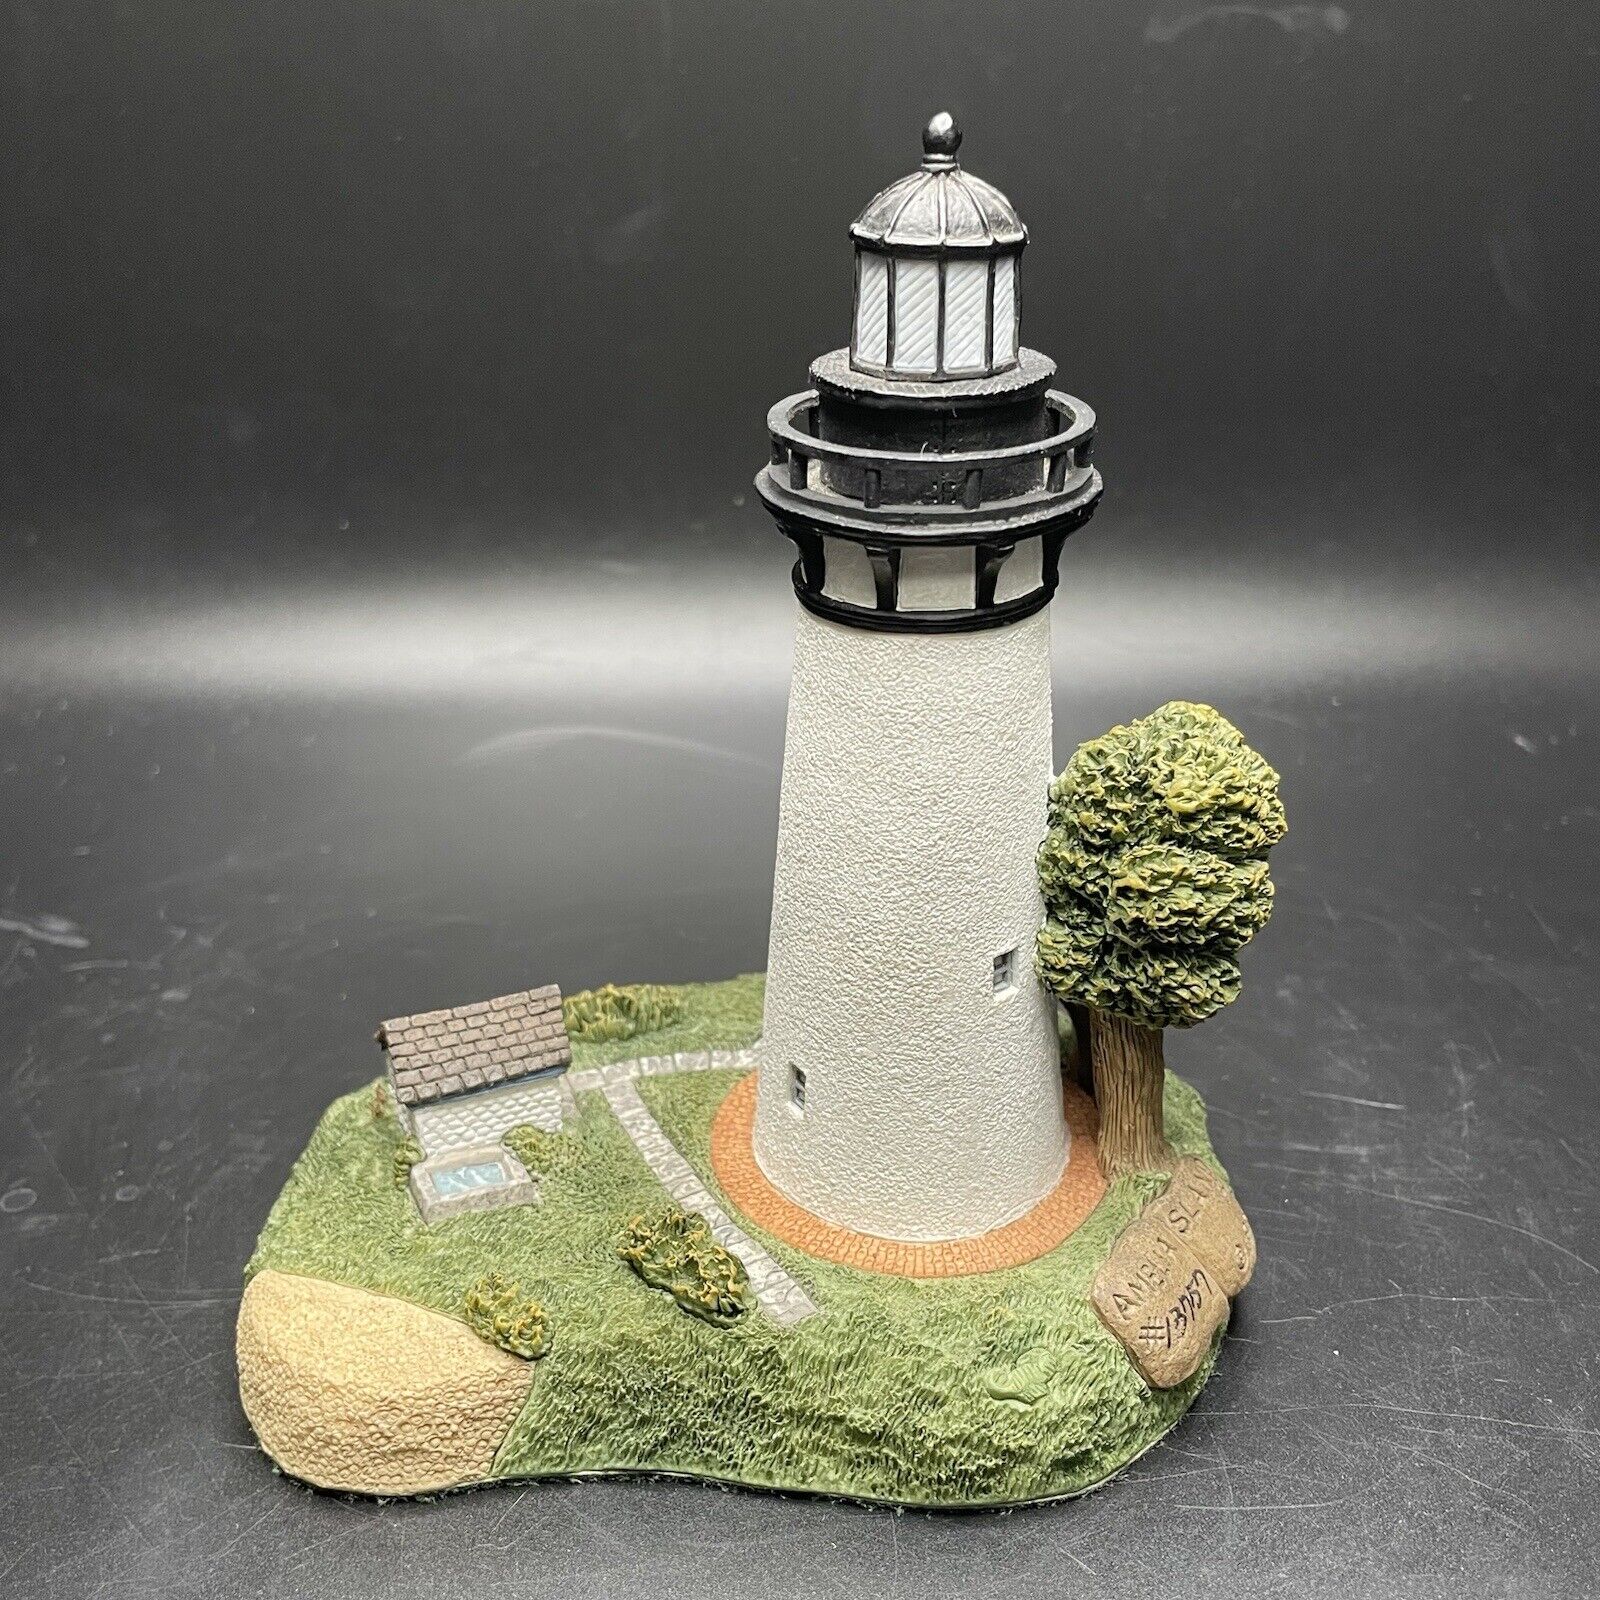 Harbour Lights Amelia Island, FL lighthouse, HL-505, Society Exclusive, Exc Cond